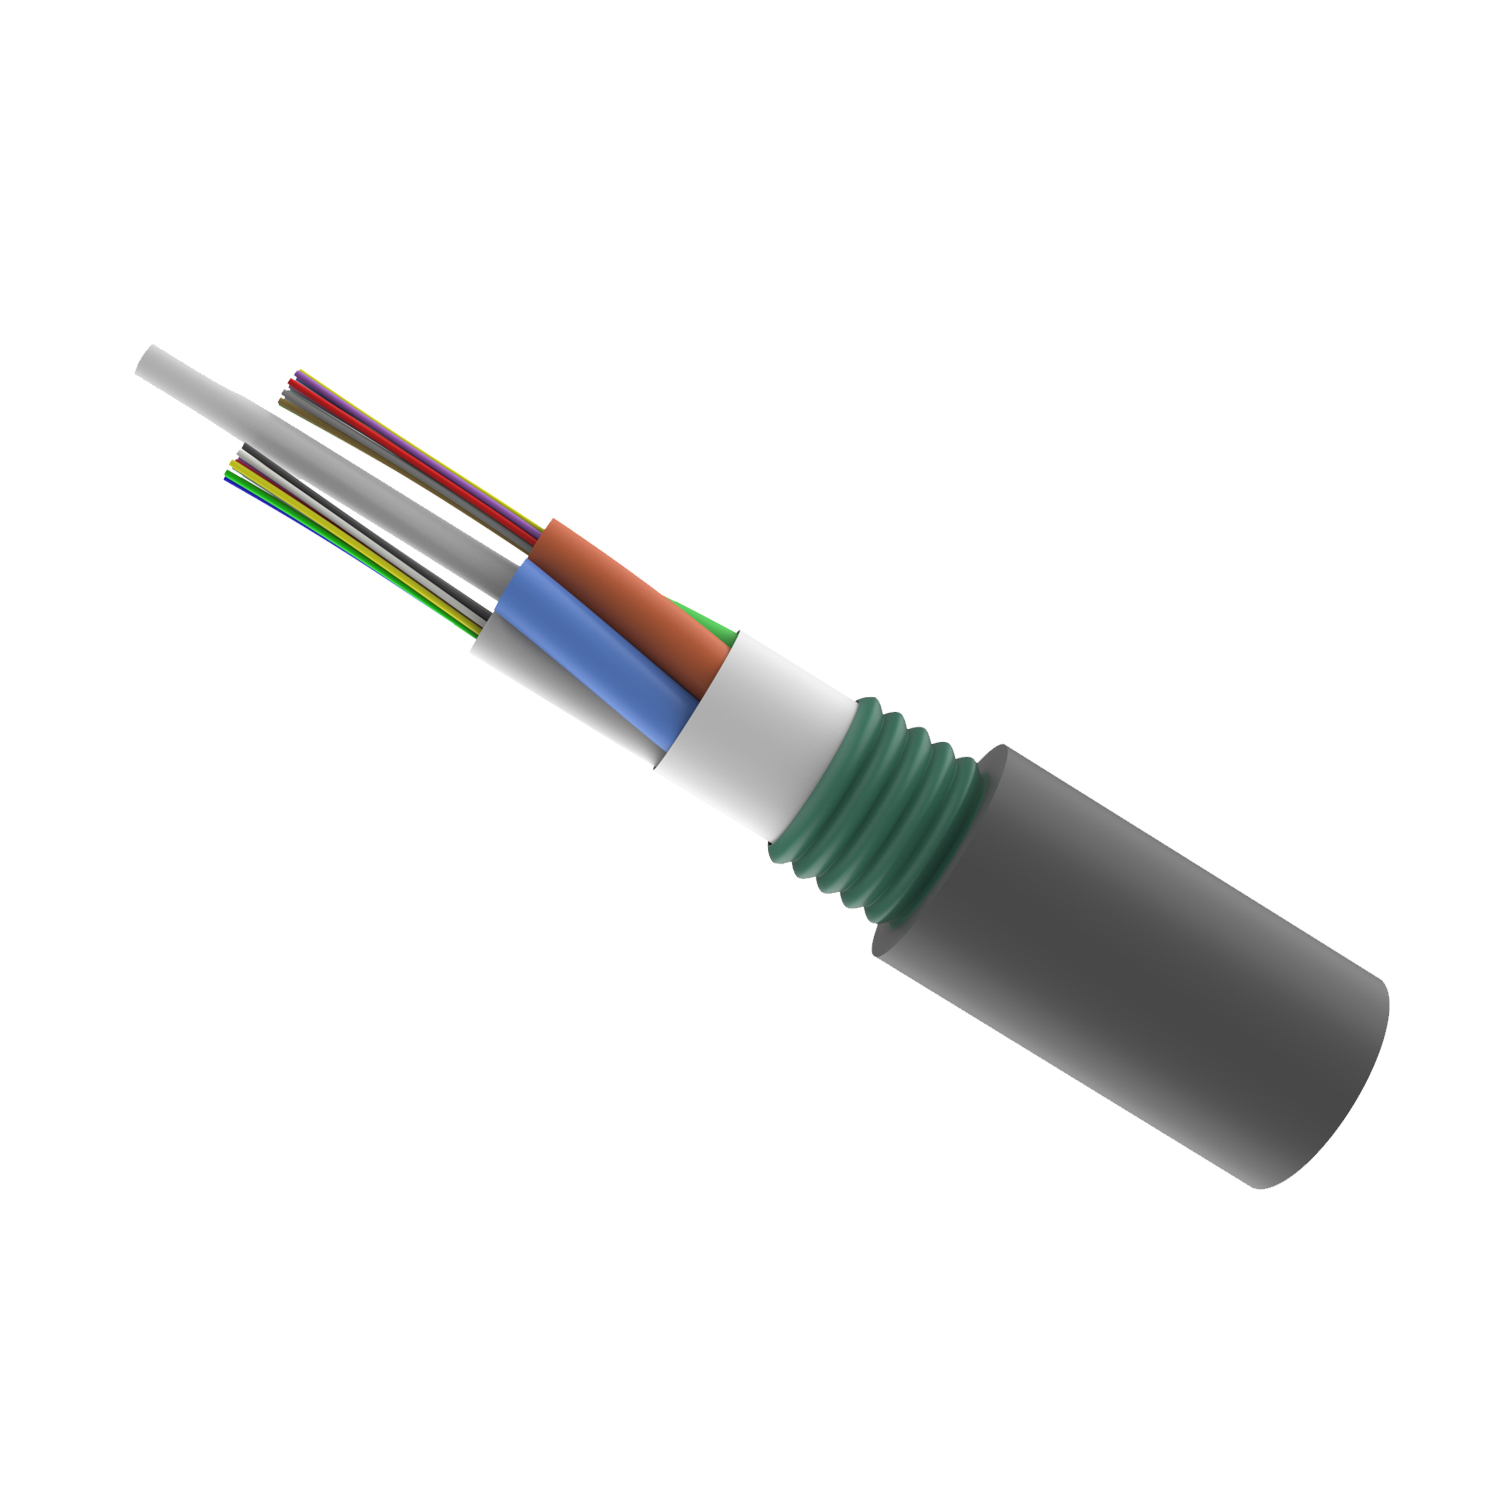 GYFTS Duct uye Non-Self-Supporting Aerial Cable